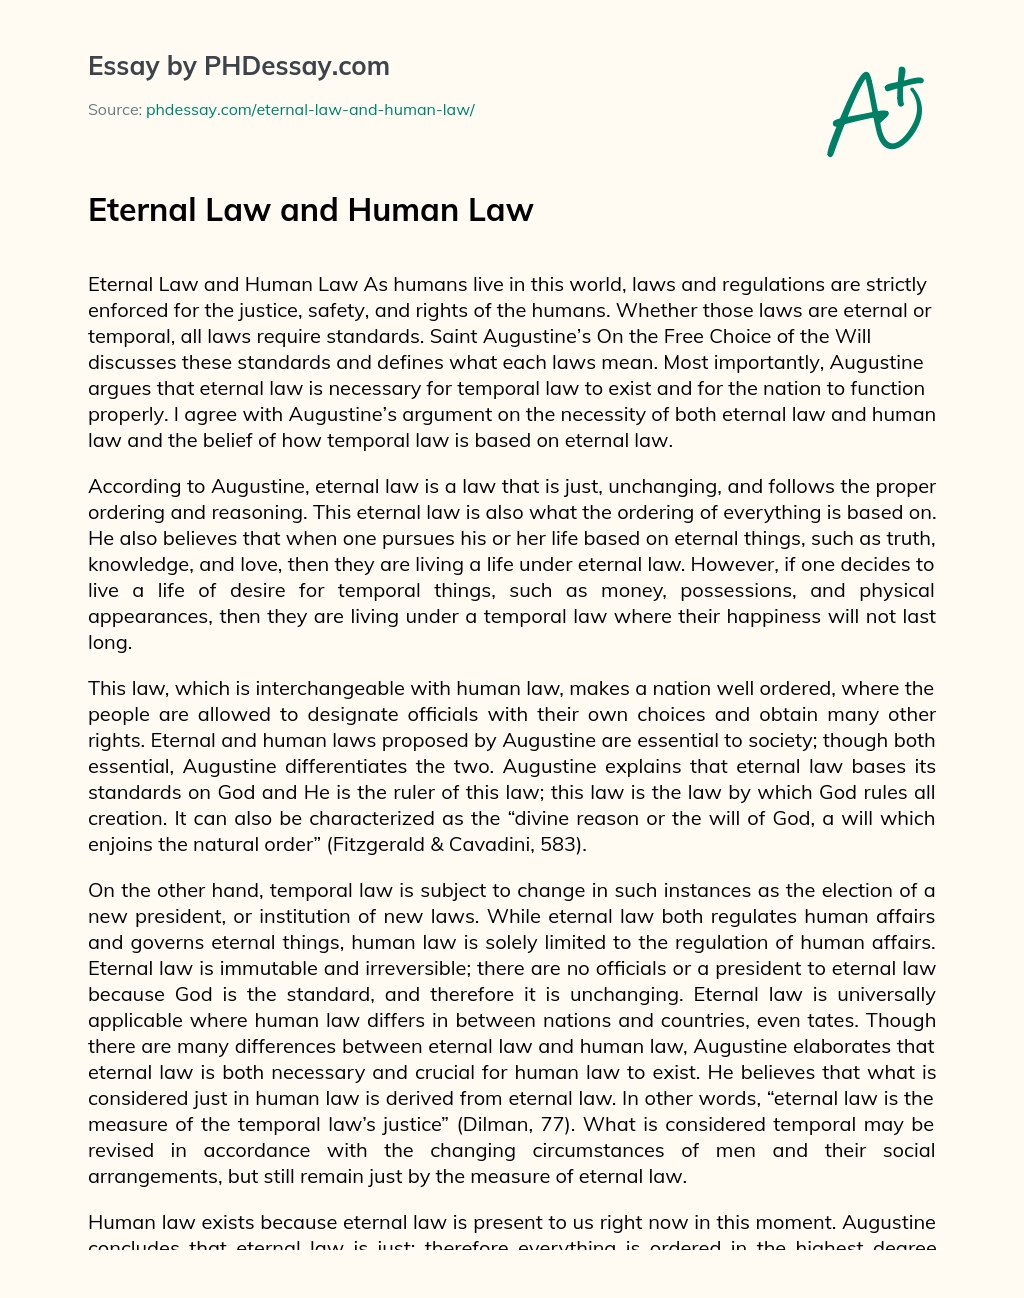 Eternal Law and Human Law essay